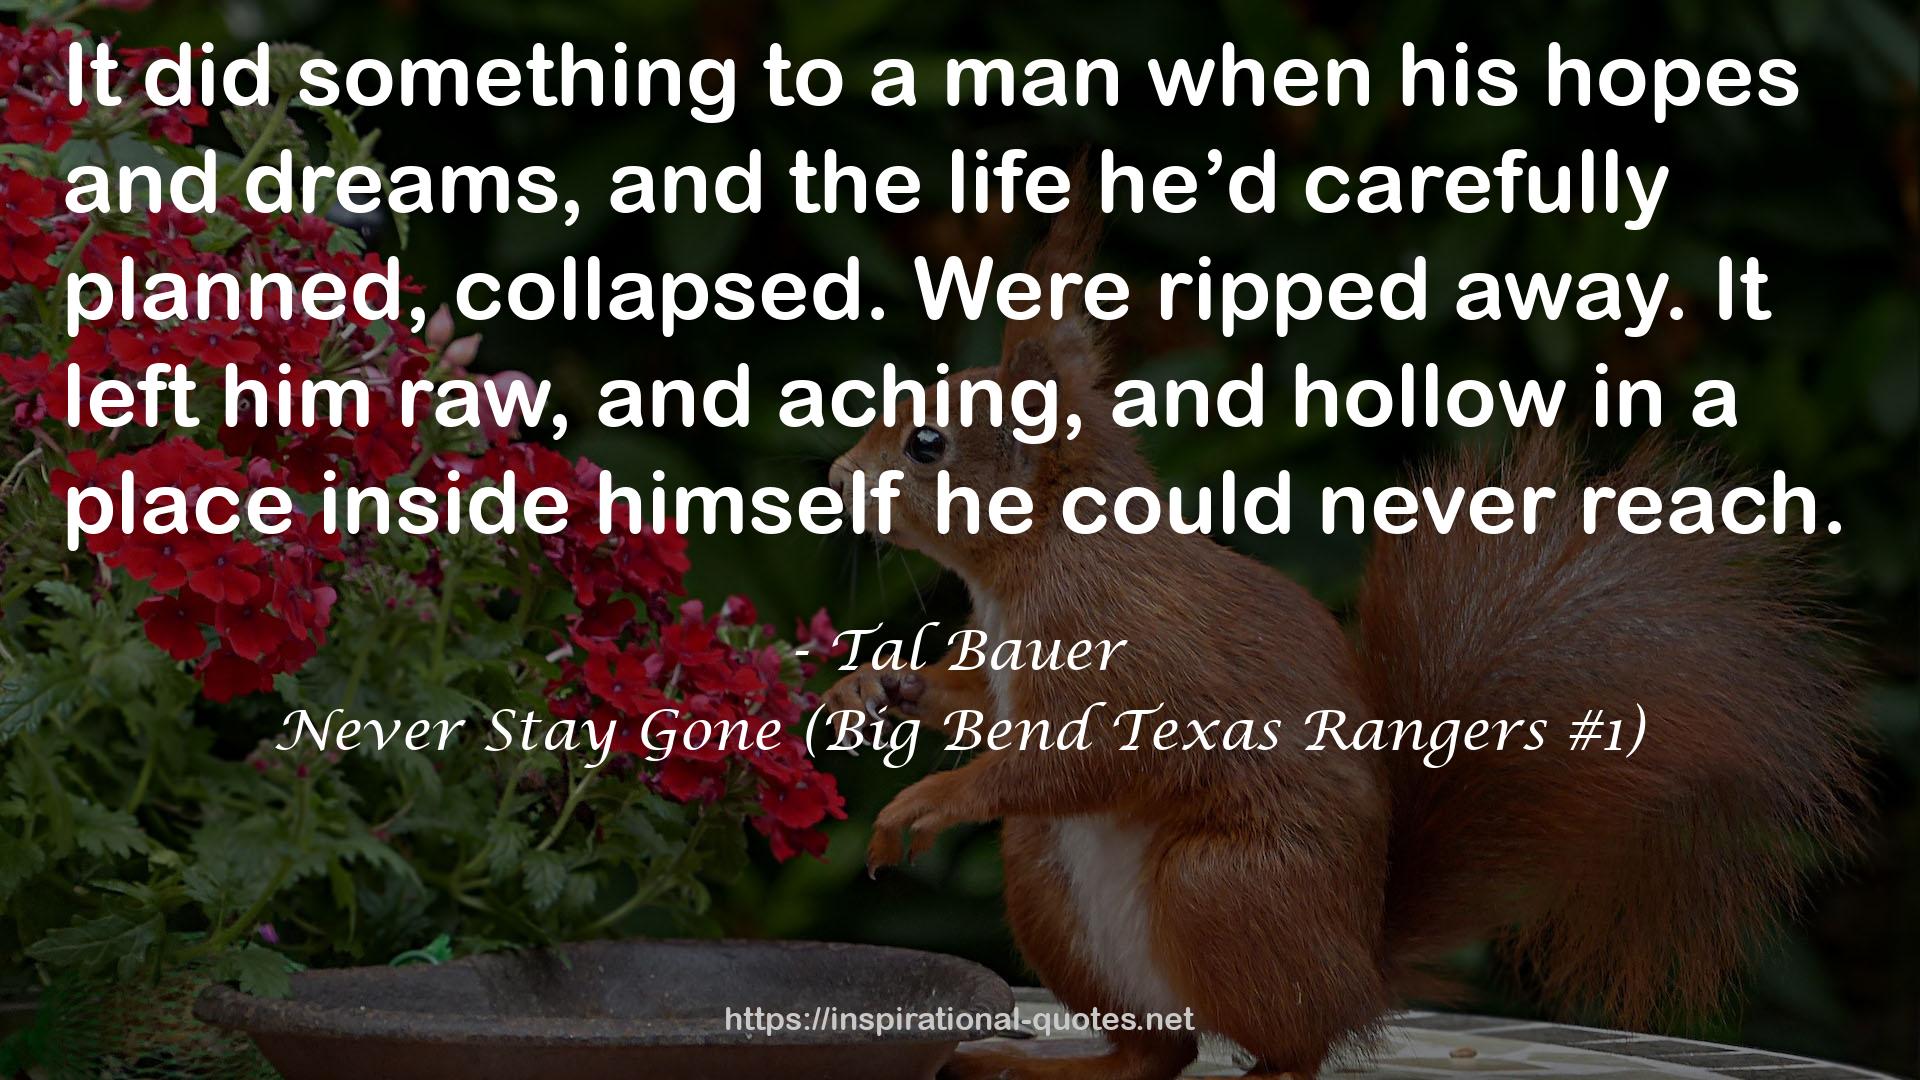 Never Stay Gone (Big Bend Texas Rangers #1) QUOTES